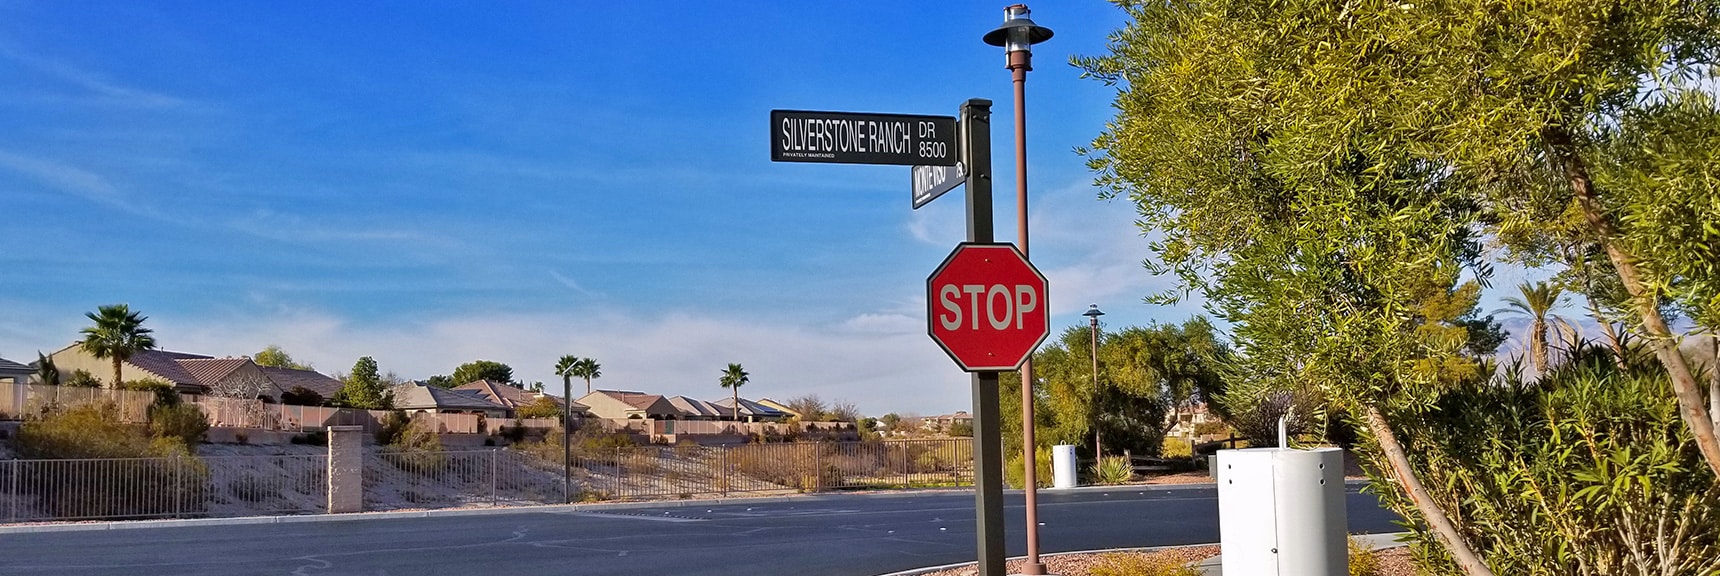 Silverstone Ranch Dr and Monte Viso Dr. Entrance of Palms Estates | Snapshot of Las Vegas Northern Growth Edge on January 3, 2021